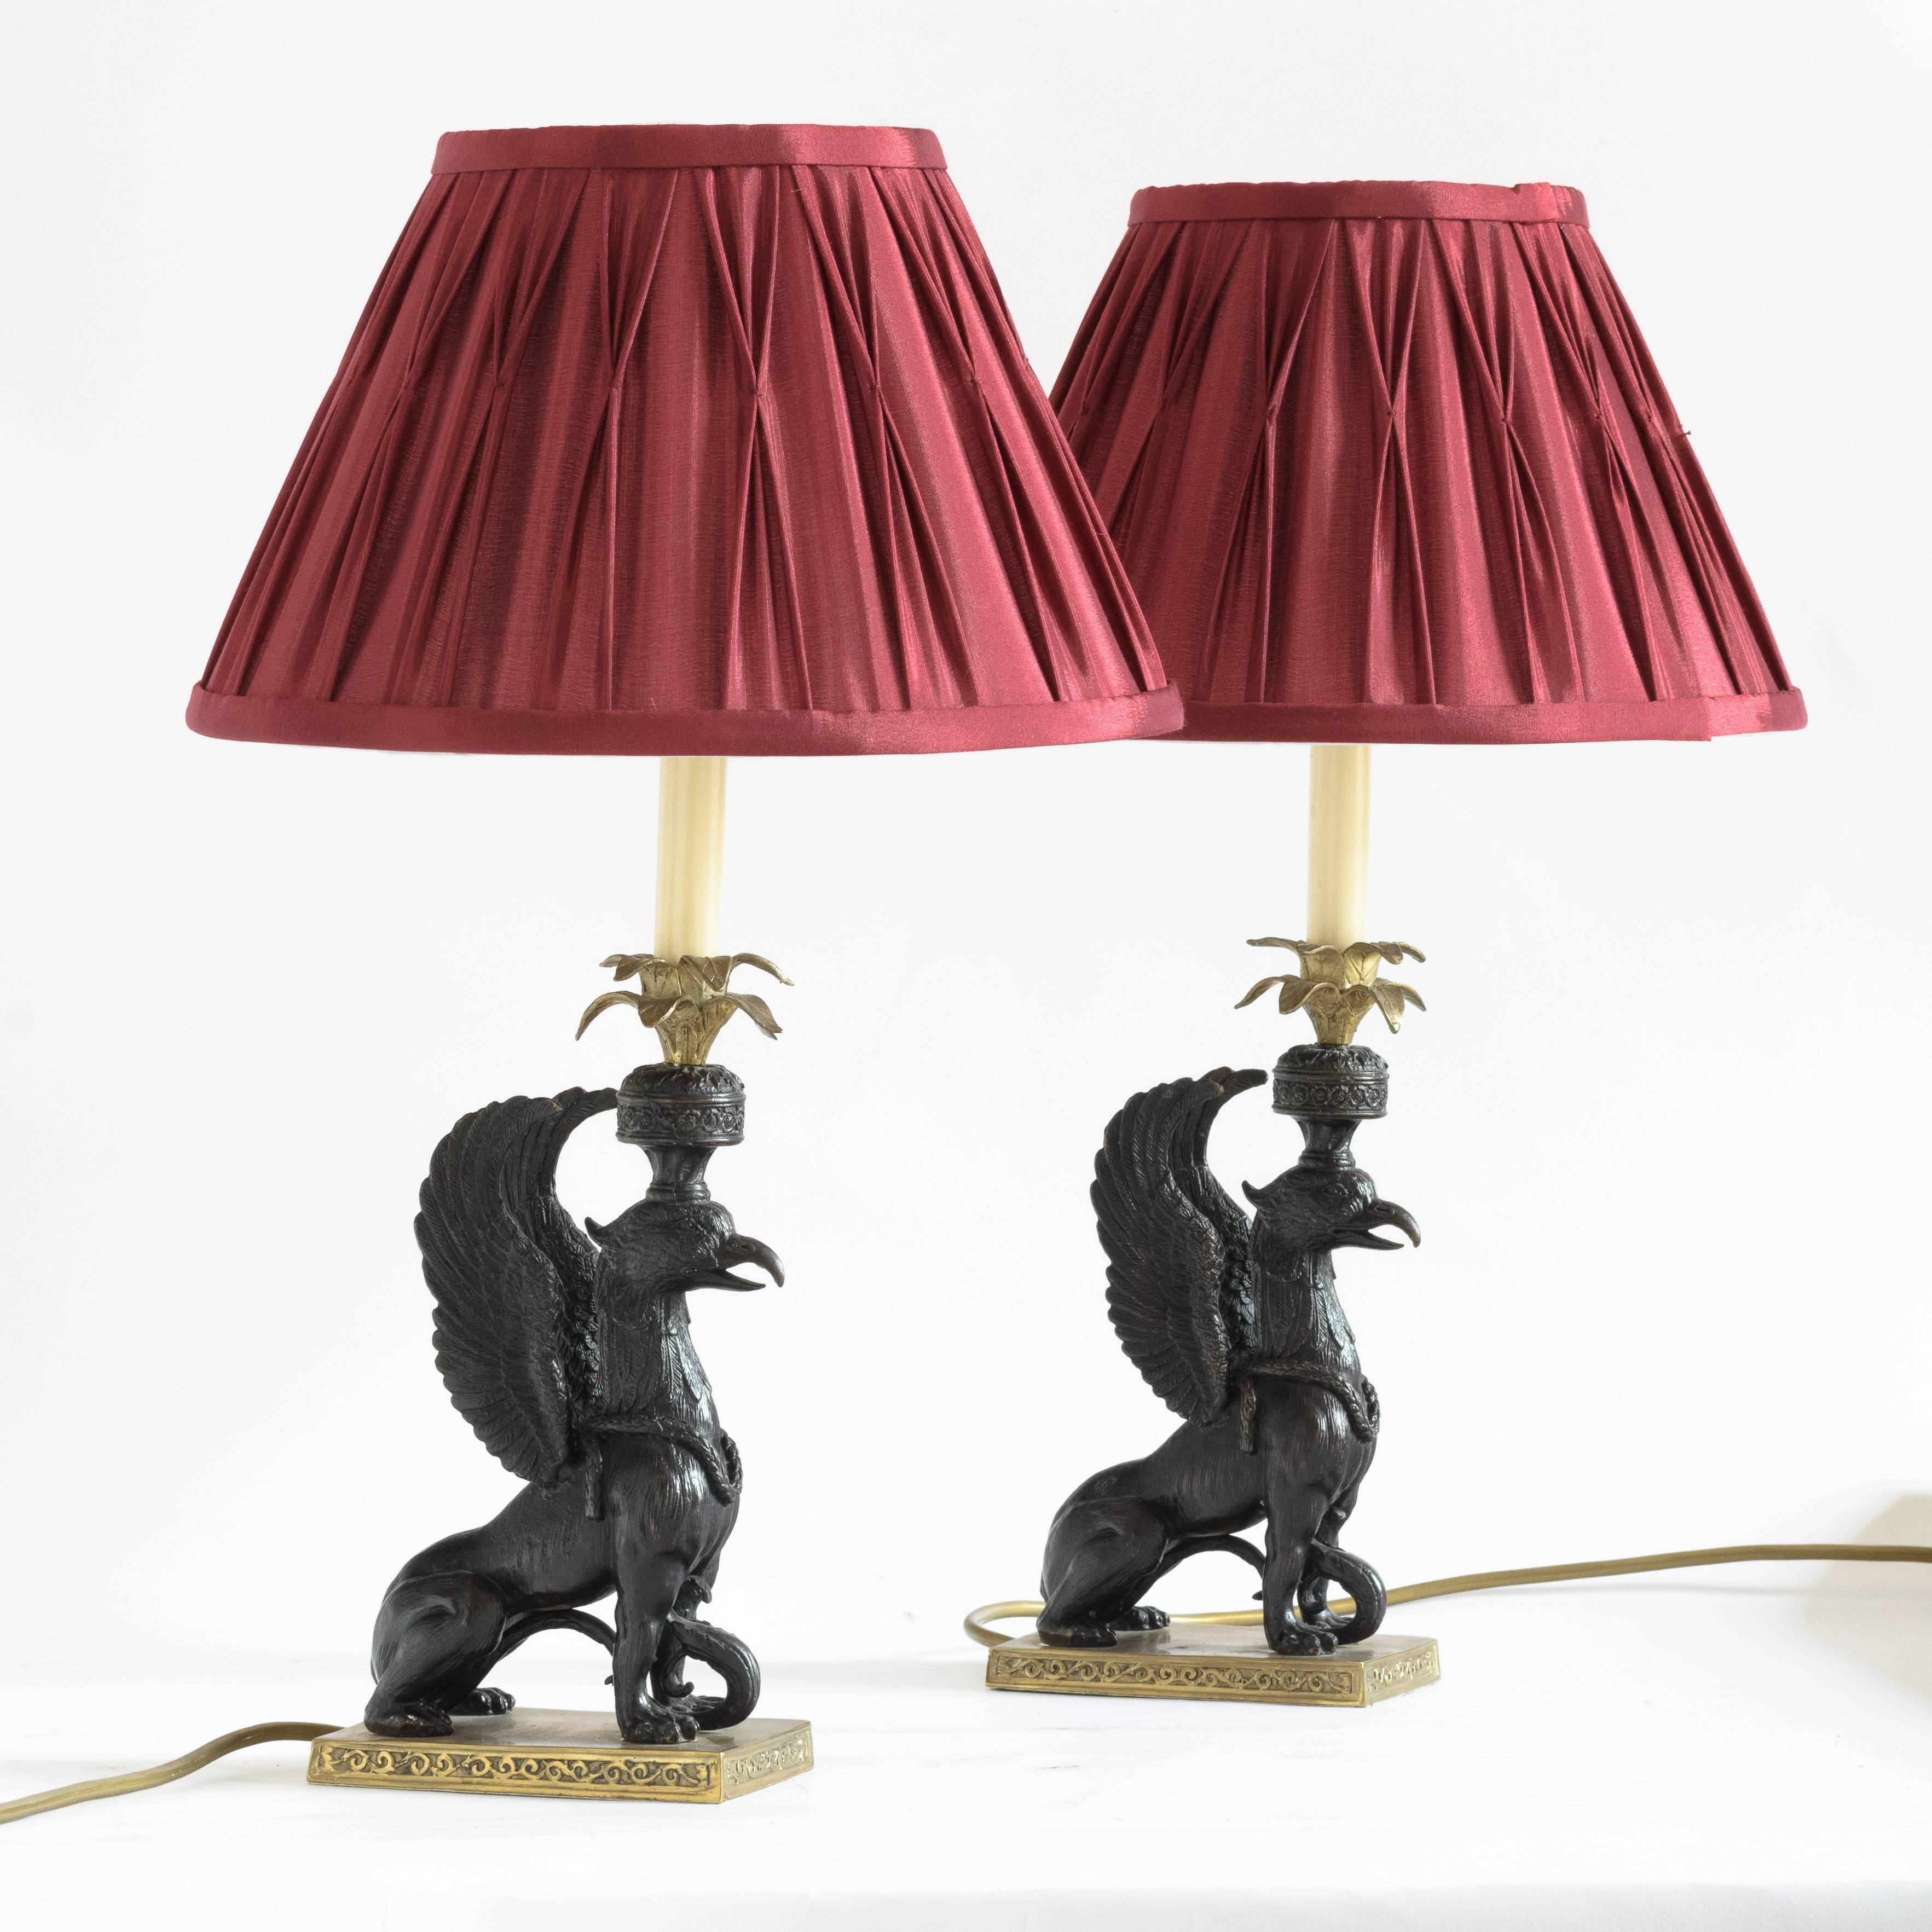 A pair of winged griffin bronze and brass table lamps, 20th century, after the 18th century originals by Sir William Chambers, with red shades.


The design of these griffin candlesticks is attributed to Sir William Chambers (1726 – 1797), court